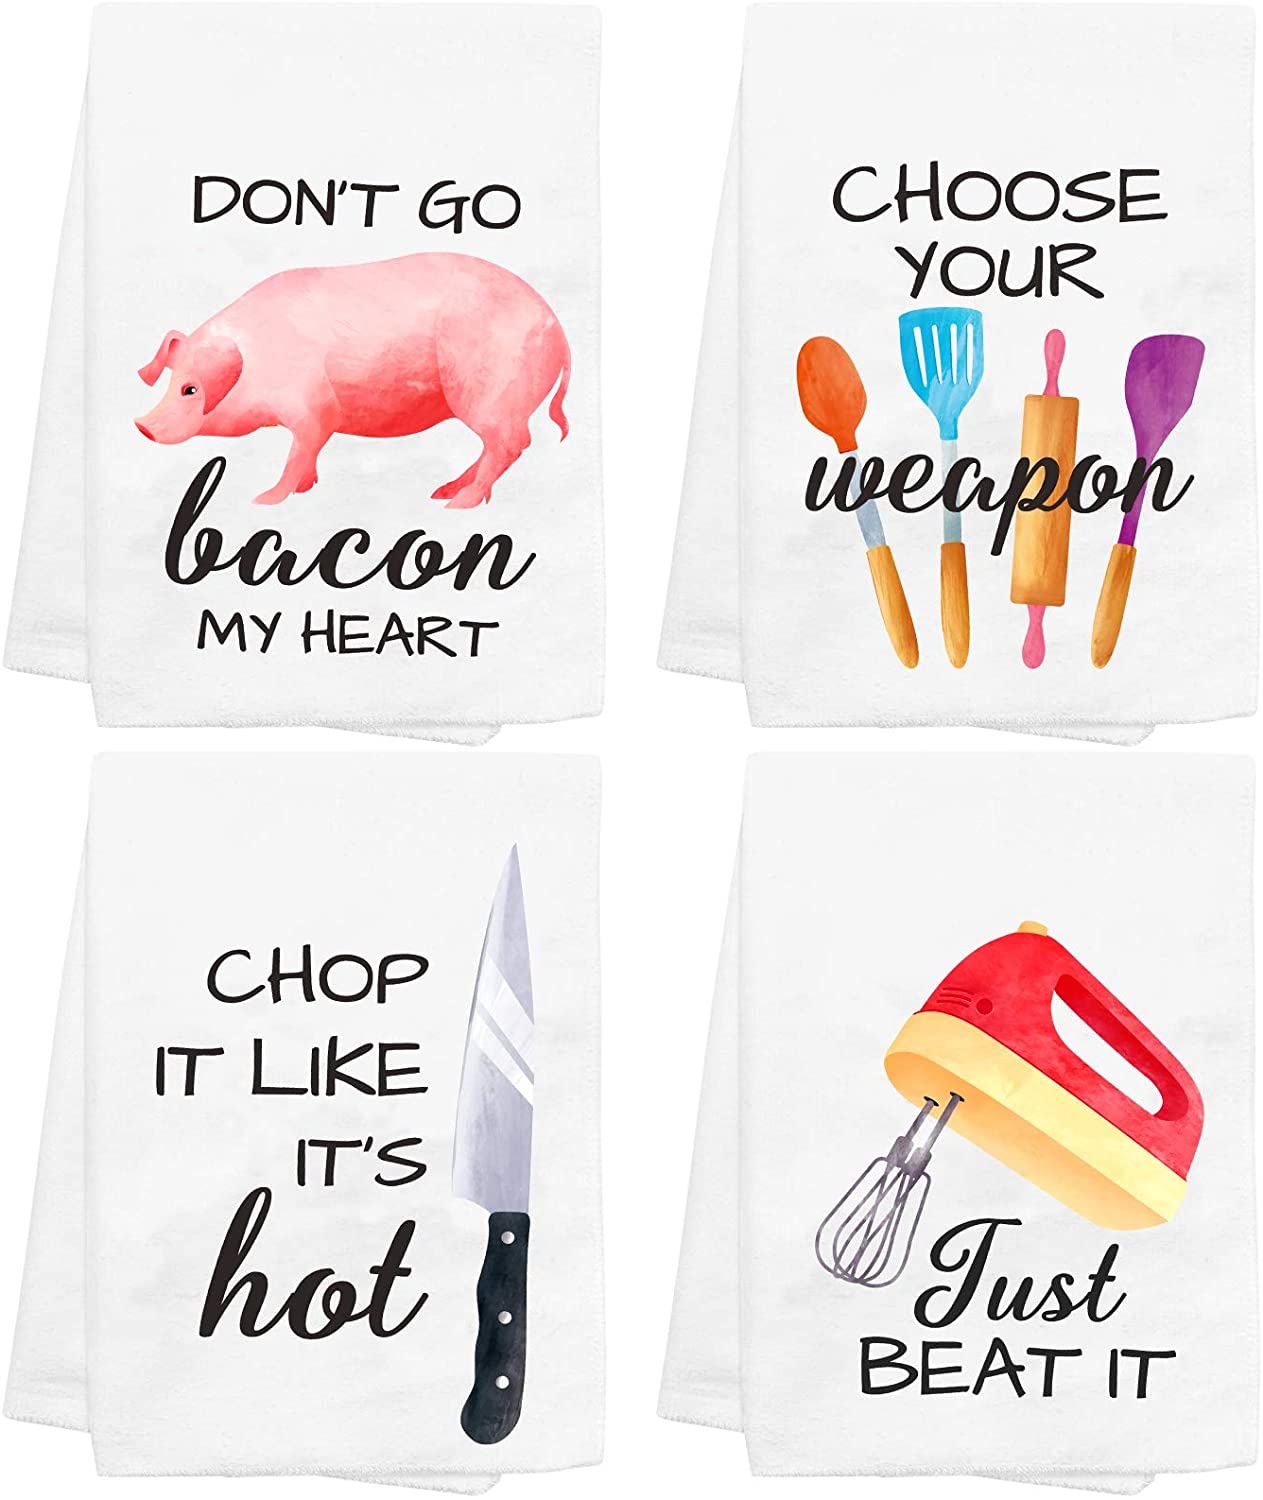 https://www.wideopencountry.com/wp-content/uploads/sites/4/eats/2021/03/CiyvoLyeen-Funny-Kitchen-Towels-Set-of-4-Dishcloths-White-Hand-Towels-Kit-Printed-with-Funny-Sayings-Novelty-Gift-for-Christmas-Housewarming-Birthday-Party-Watercolor-Style-.jpg?resize=1263%2C1500